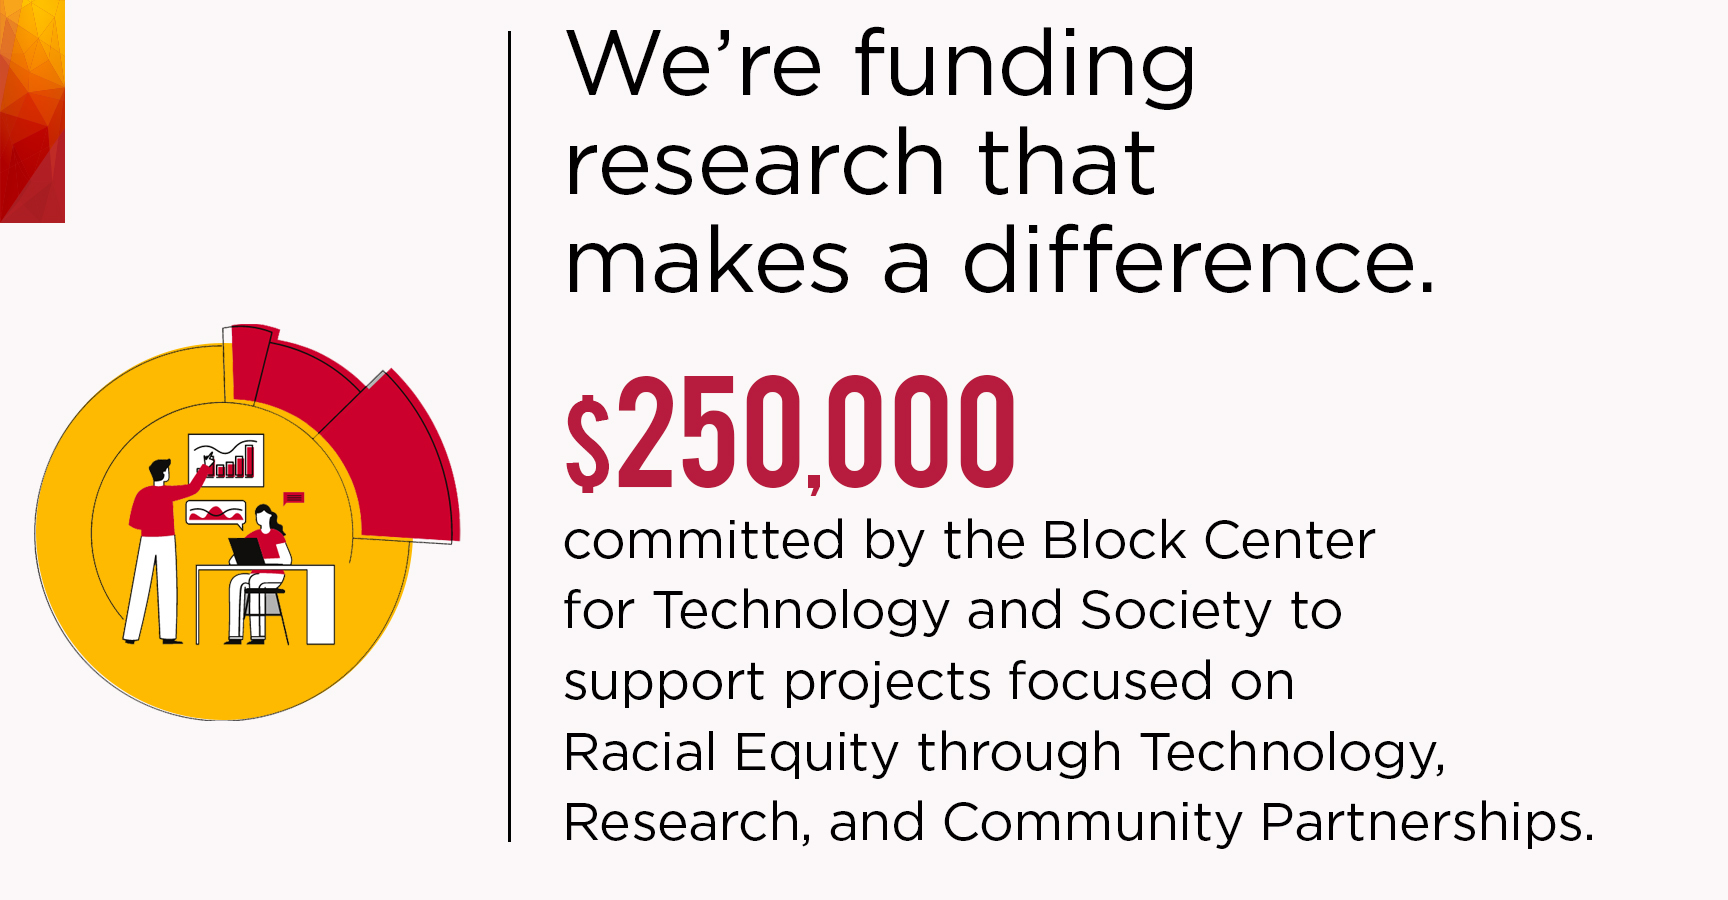 Funding Research that makes a difference